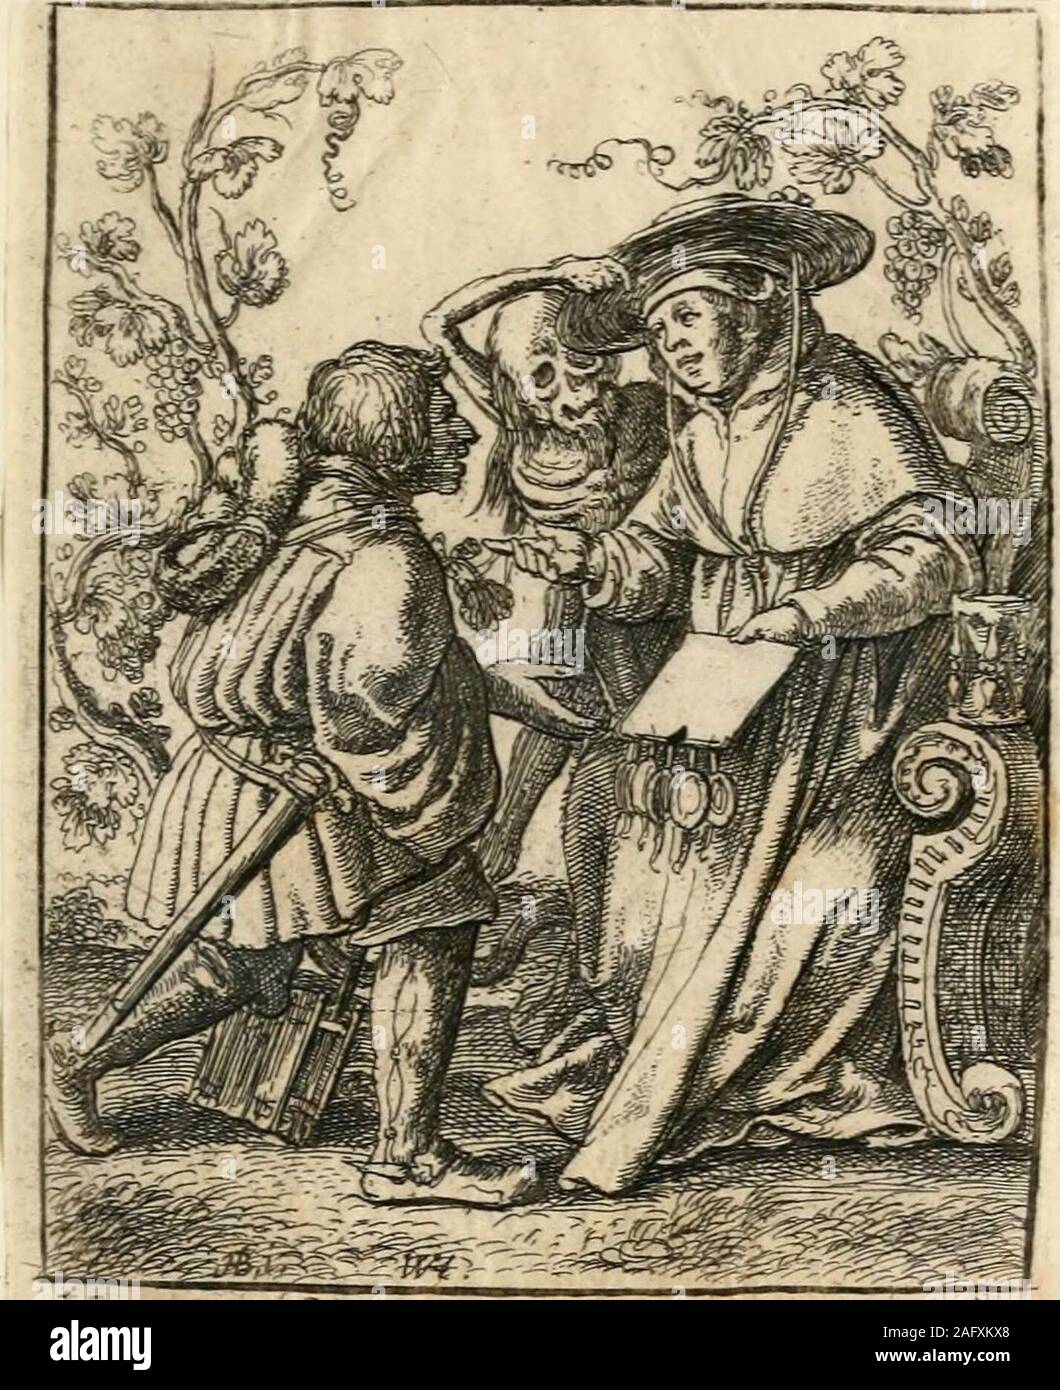 . The dance of death. Zs-M- T^, 49 THE QUEEN. VIII. She is walking out from her palace, accom-panied by two of her ladies and her jester.Death, having previously despoiled the motleypersonage of his habiliments, and grotesquelydecorated himself therewith, is forcibly drag-ging away the Queen. The fool attempts in-effectually to protect her, whilst the femaleattendants join in the lamentations of theirmistress. K so THE CARDINAL. IX. HE is disposing of his indulgencies to arich offender, who brings with him a chest ofmoney. Death snatches off the Cardinalshat.. Stock Photo